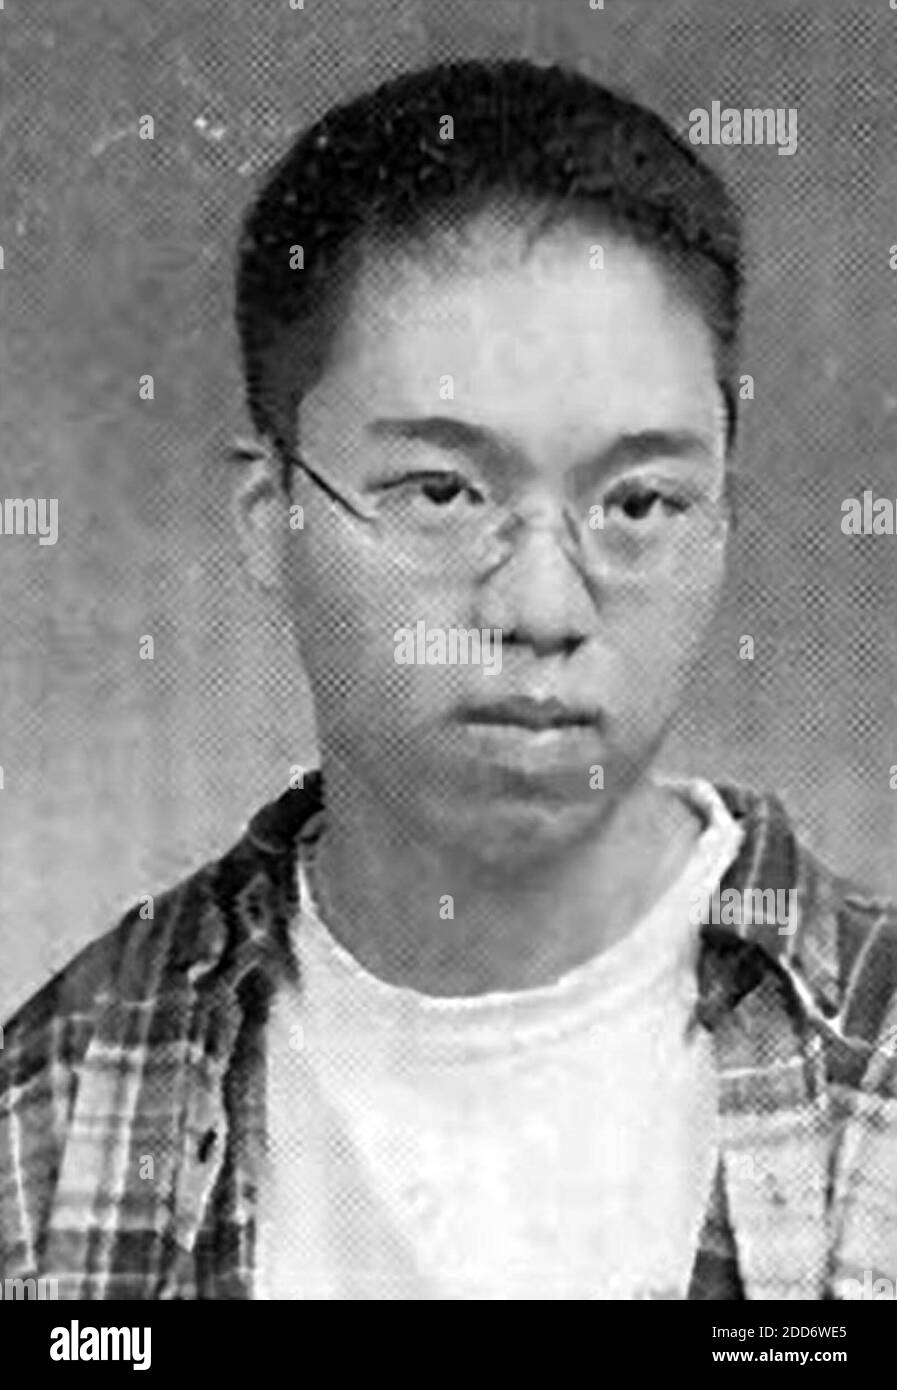 NO FILM, NO VIDEO, NO TV, NO DOCUMENTARY - Cho Seung-Hui, pictured in this undated Wakefield High School yearbook photograph, is the suspected gunman in the Virginia Tech shooting rampage on April 16, 2007. Police said Cho killed 30 people in a Virginia Tech engineering building Monday morning and then killed himself. Photo courtesy Office of Community Relations via MCT/ABACAPRESS.COM Stock Photo